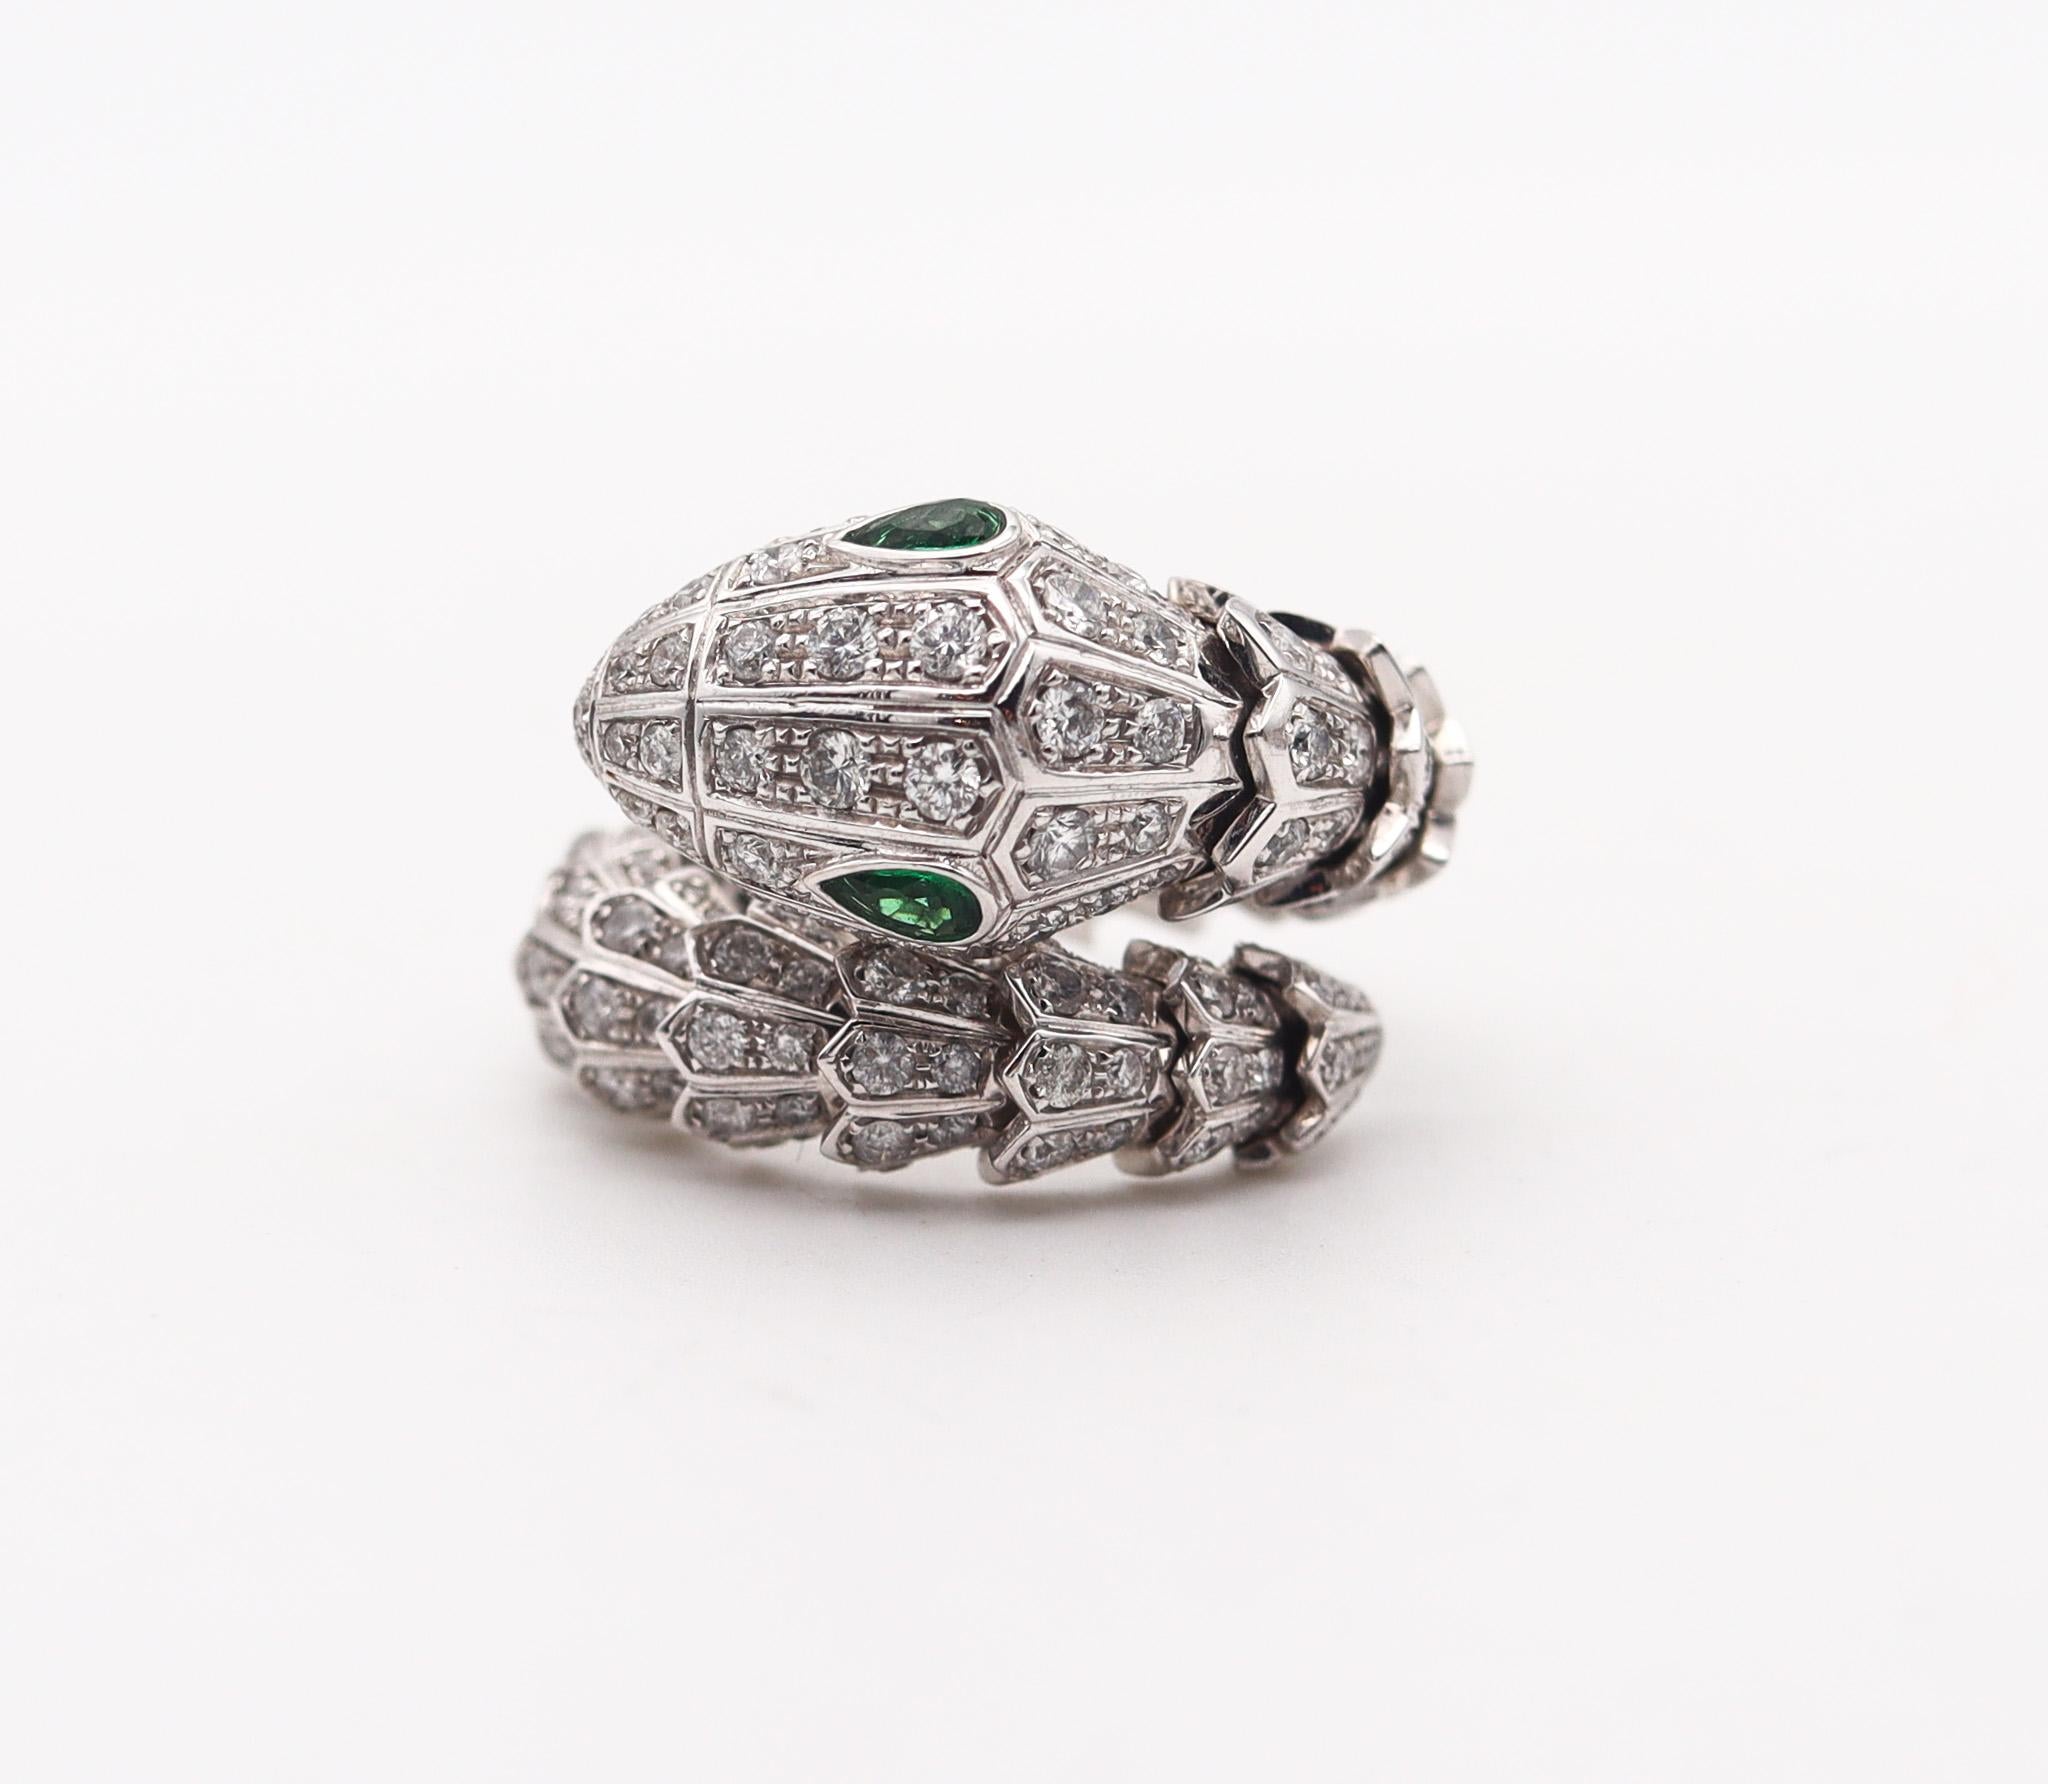 A gems-set Serpenti flexible ring designed by Bvlgari.

This ring is an exceptional piece of jewelry, created in Rome Italy by the iconic jewelry house of Bvlgari. This rare Serpenti ring is part of the Bvlgari Prestige Collection and was carefully